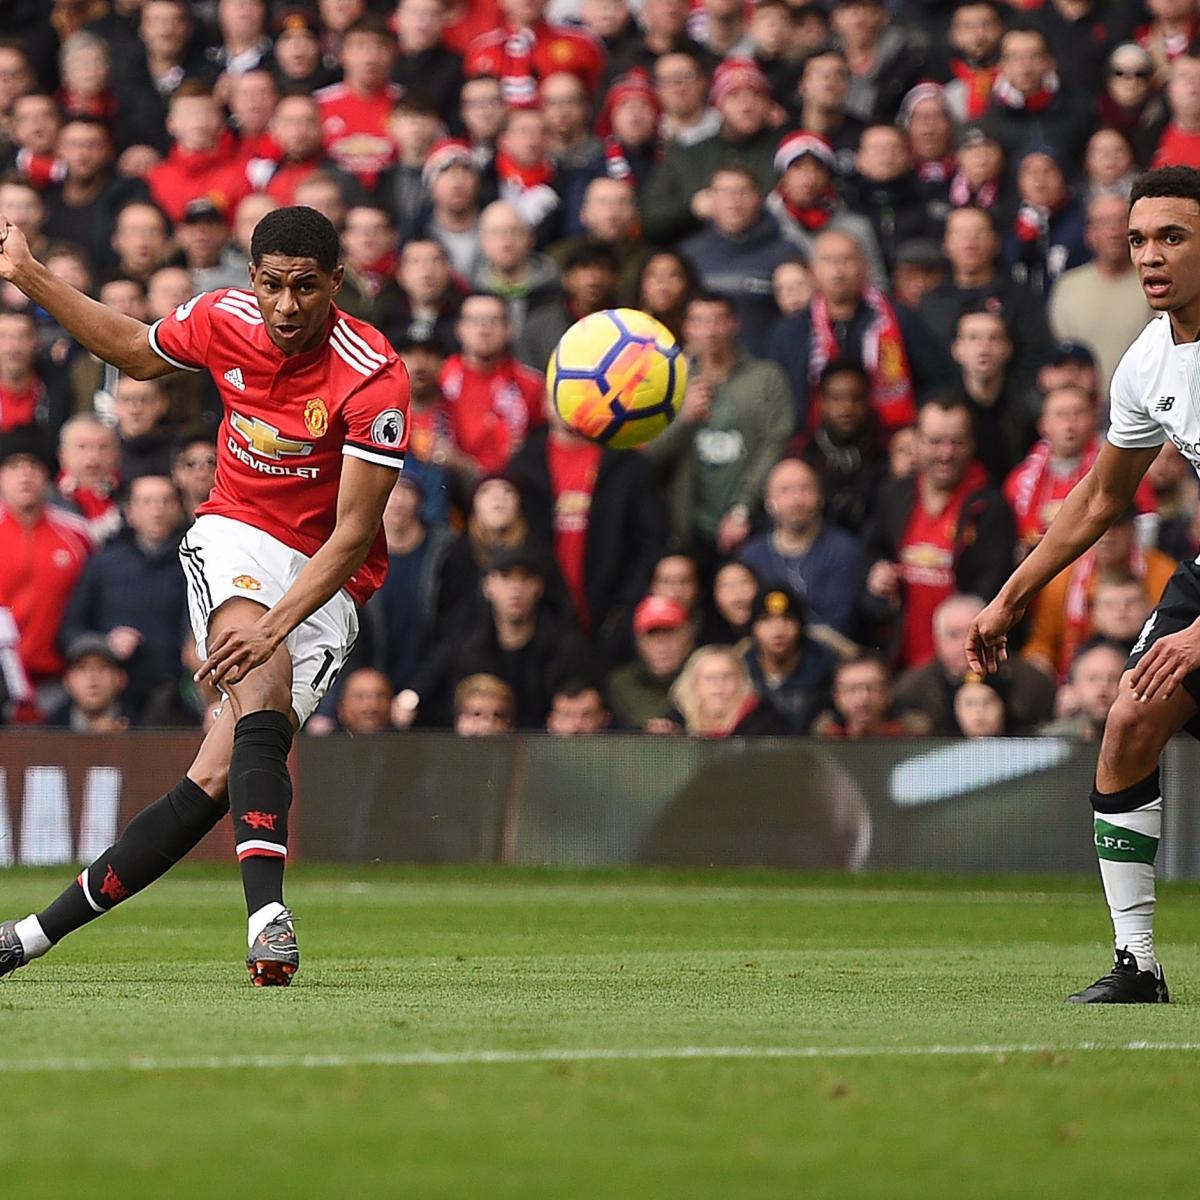 Premier League: Manchester United set to face Liverpool, Tottenham, Man City, Chelsea and Arsenal in coming weeks